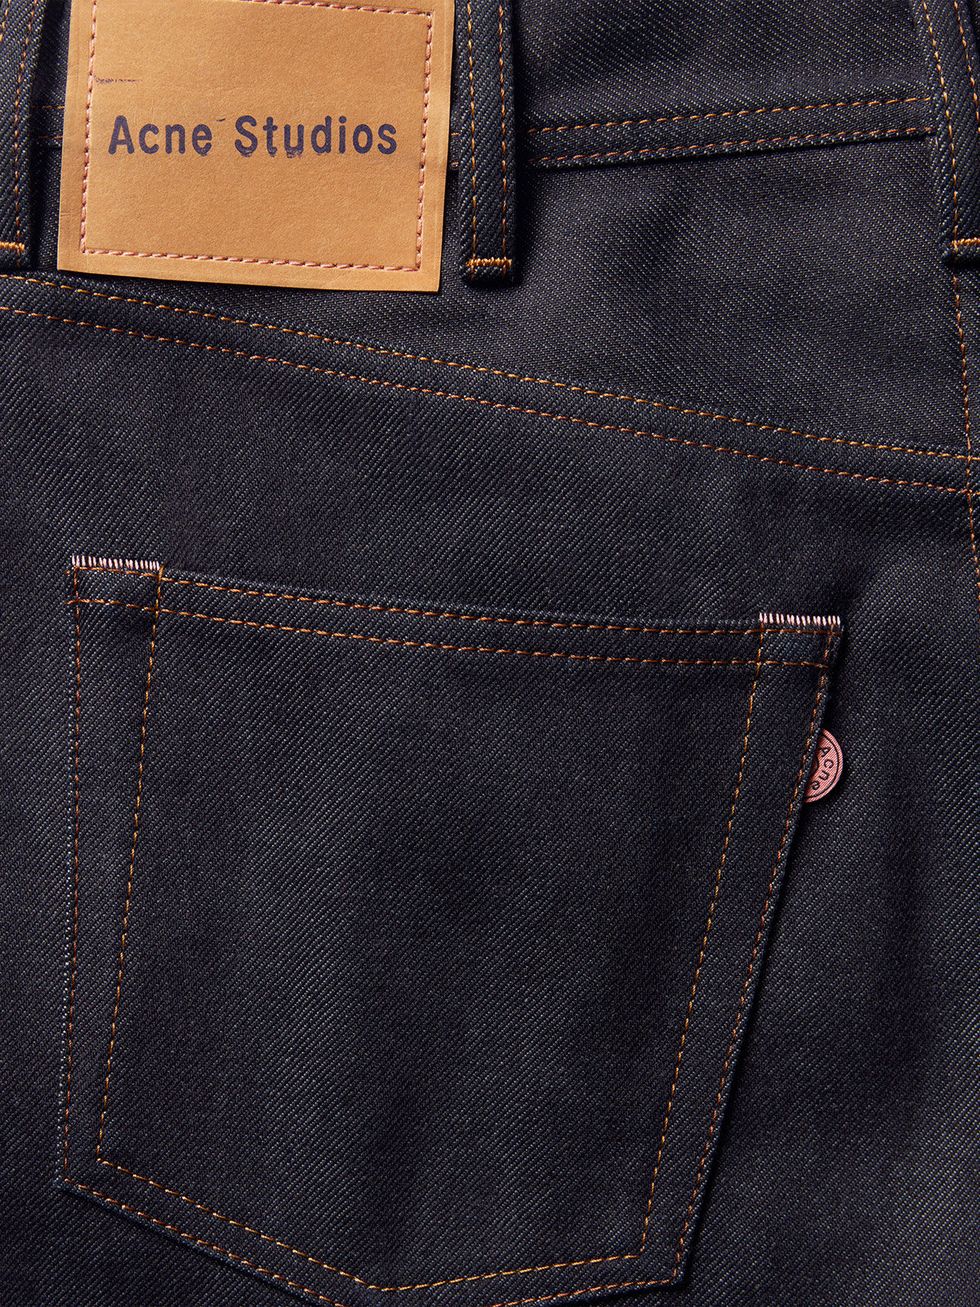 Denim, Jeans, Clothing, Pocket, Brown, Textile, Trousers, Stitch, Leather, 